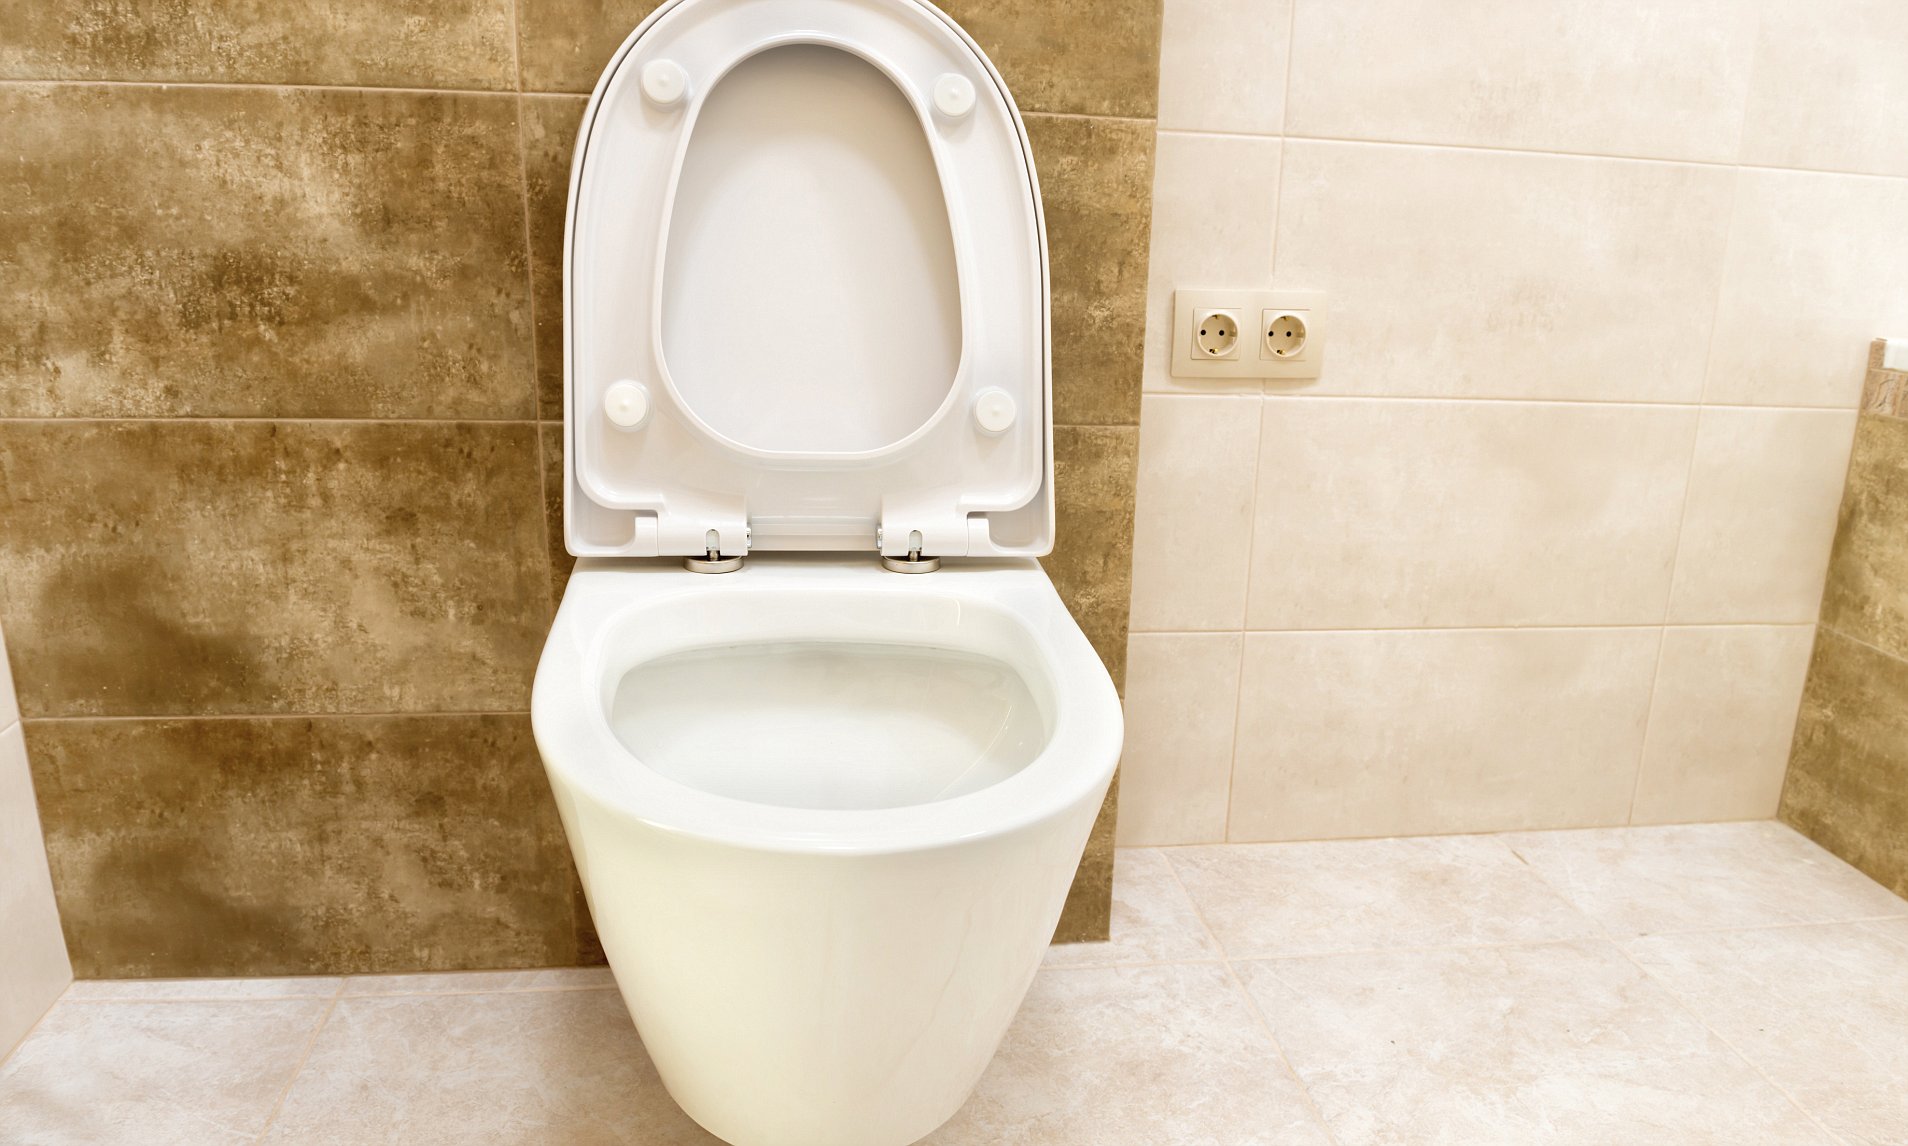 Things Men Learned in a Relationship - Toilet